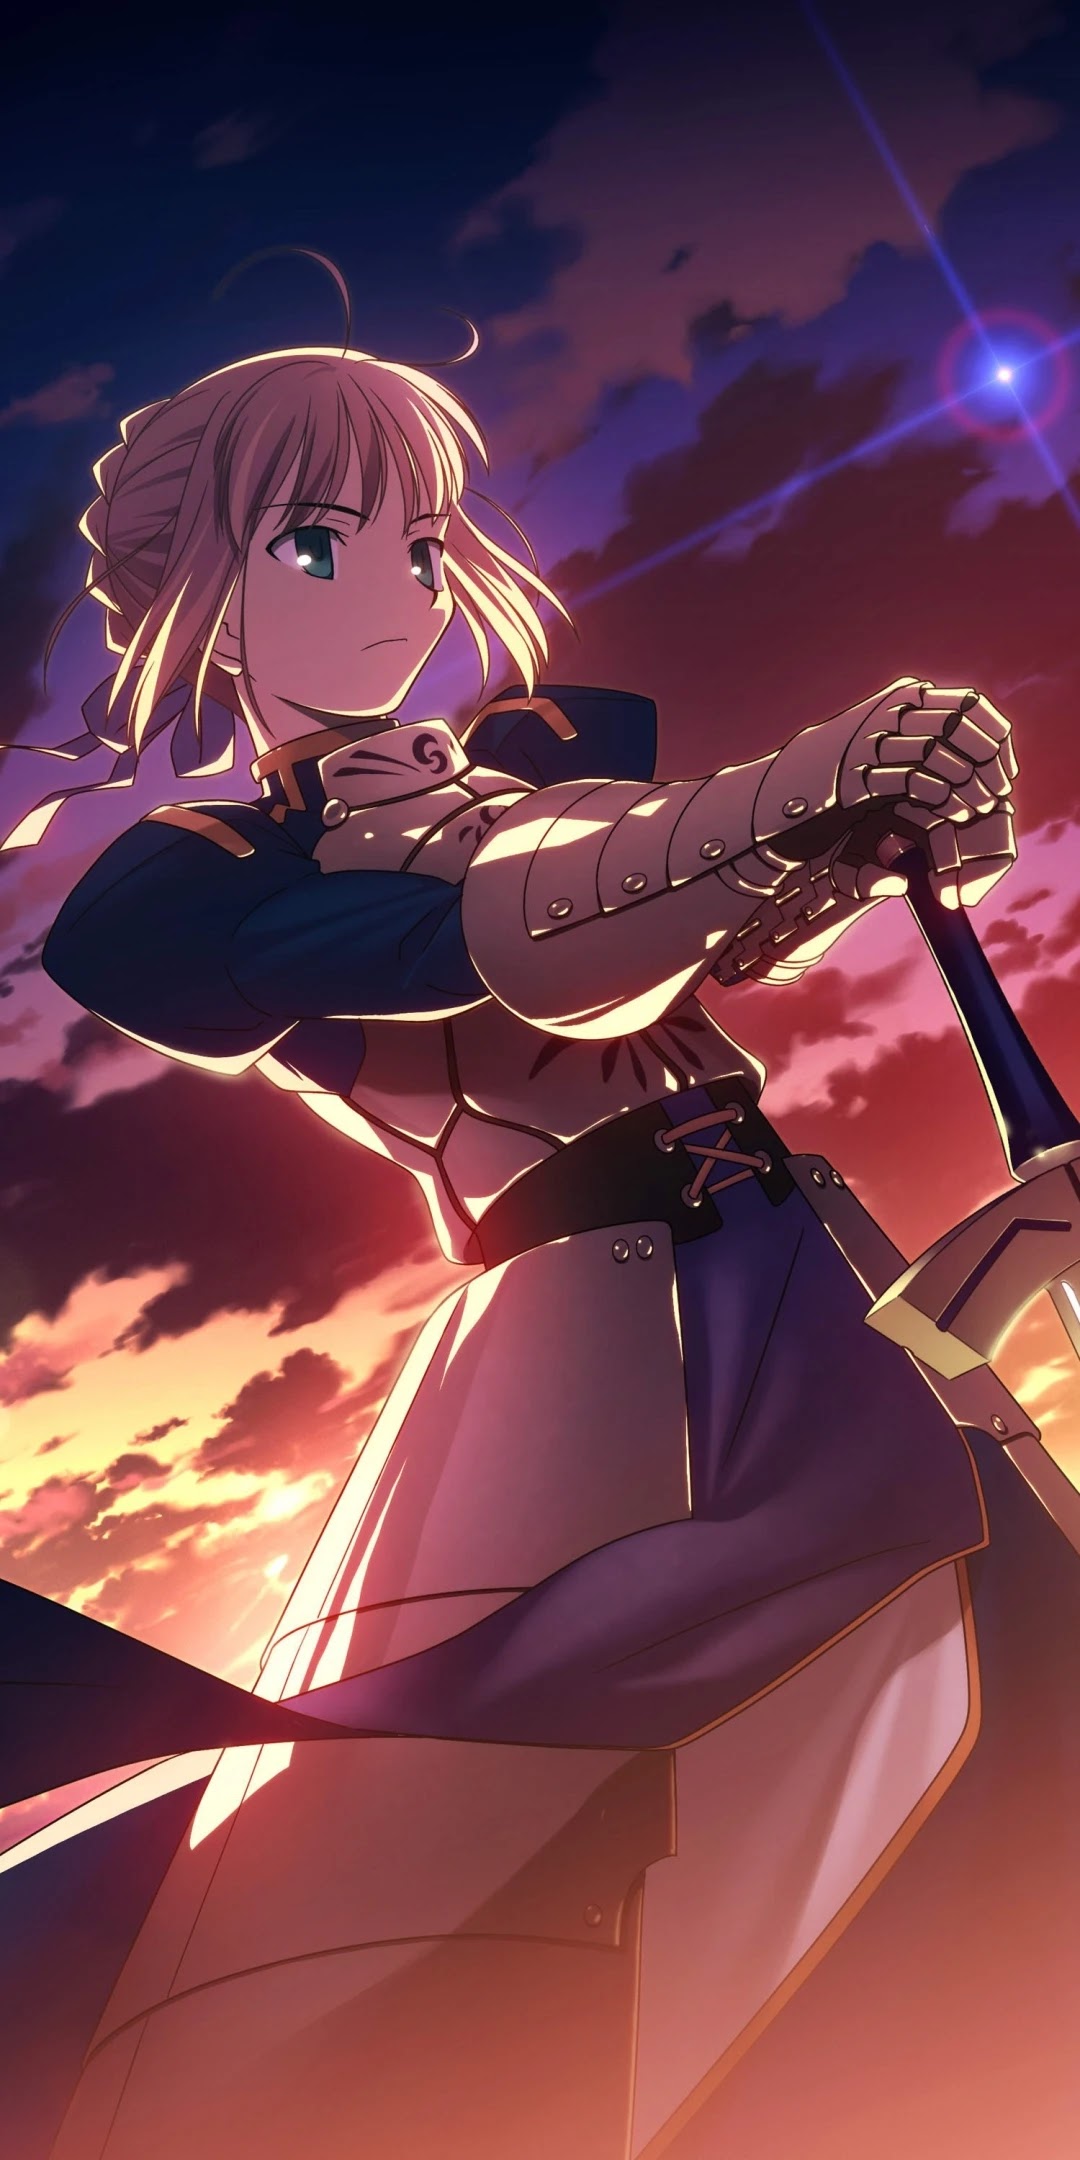 Saber phone wallpaper - Anime - Fate/stay Night - ponselwallpaper